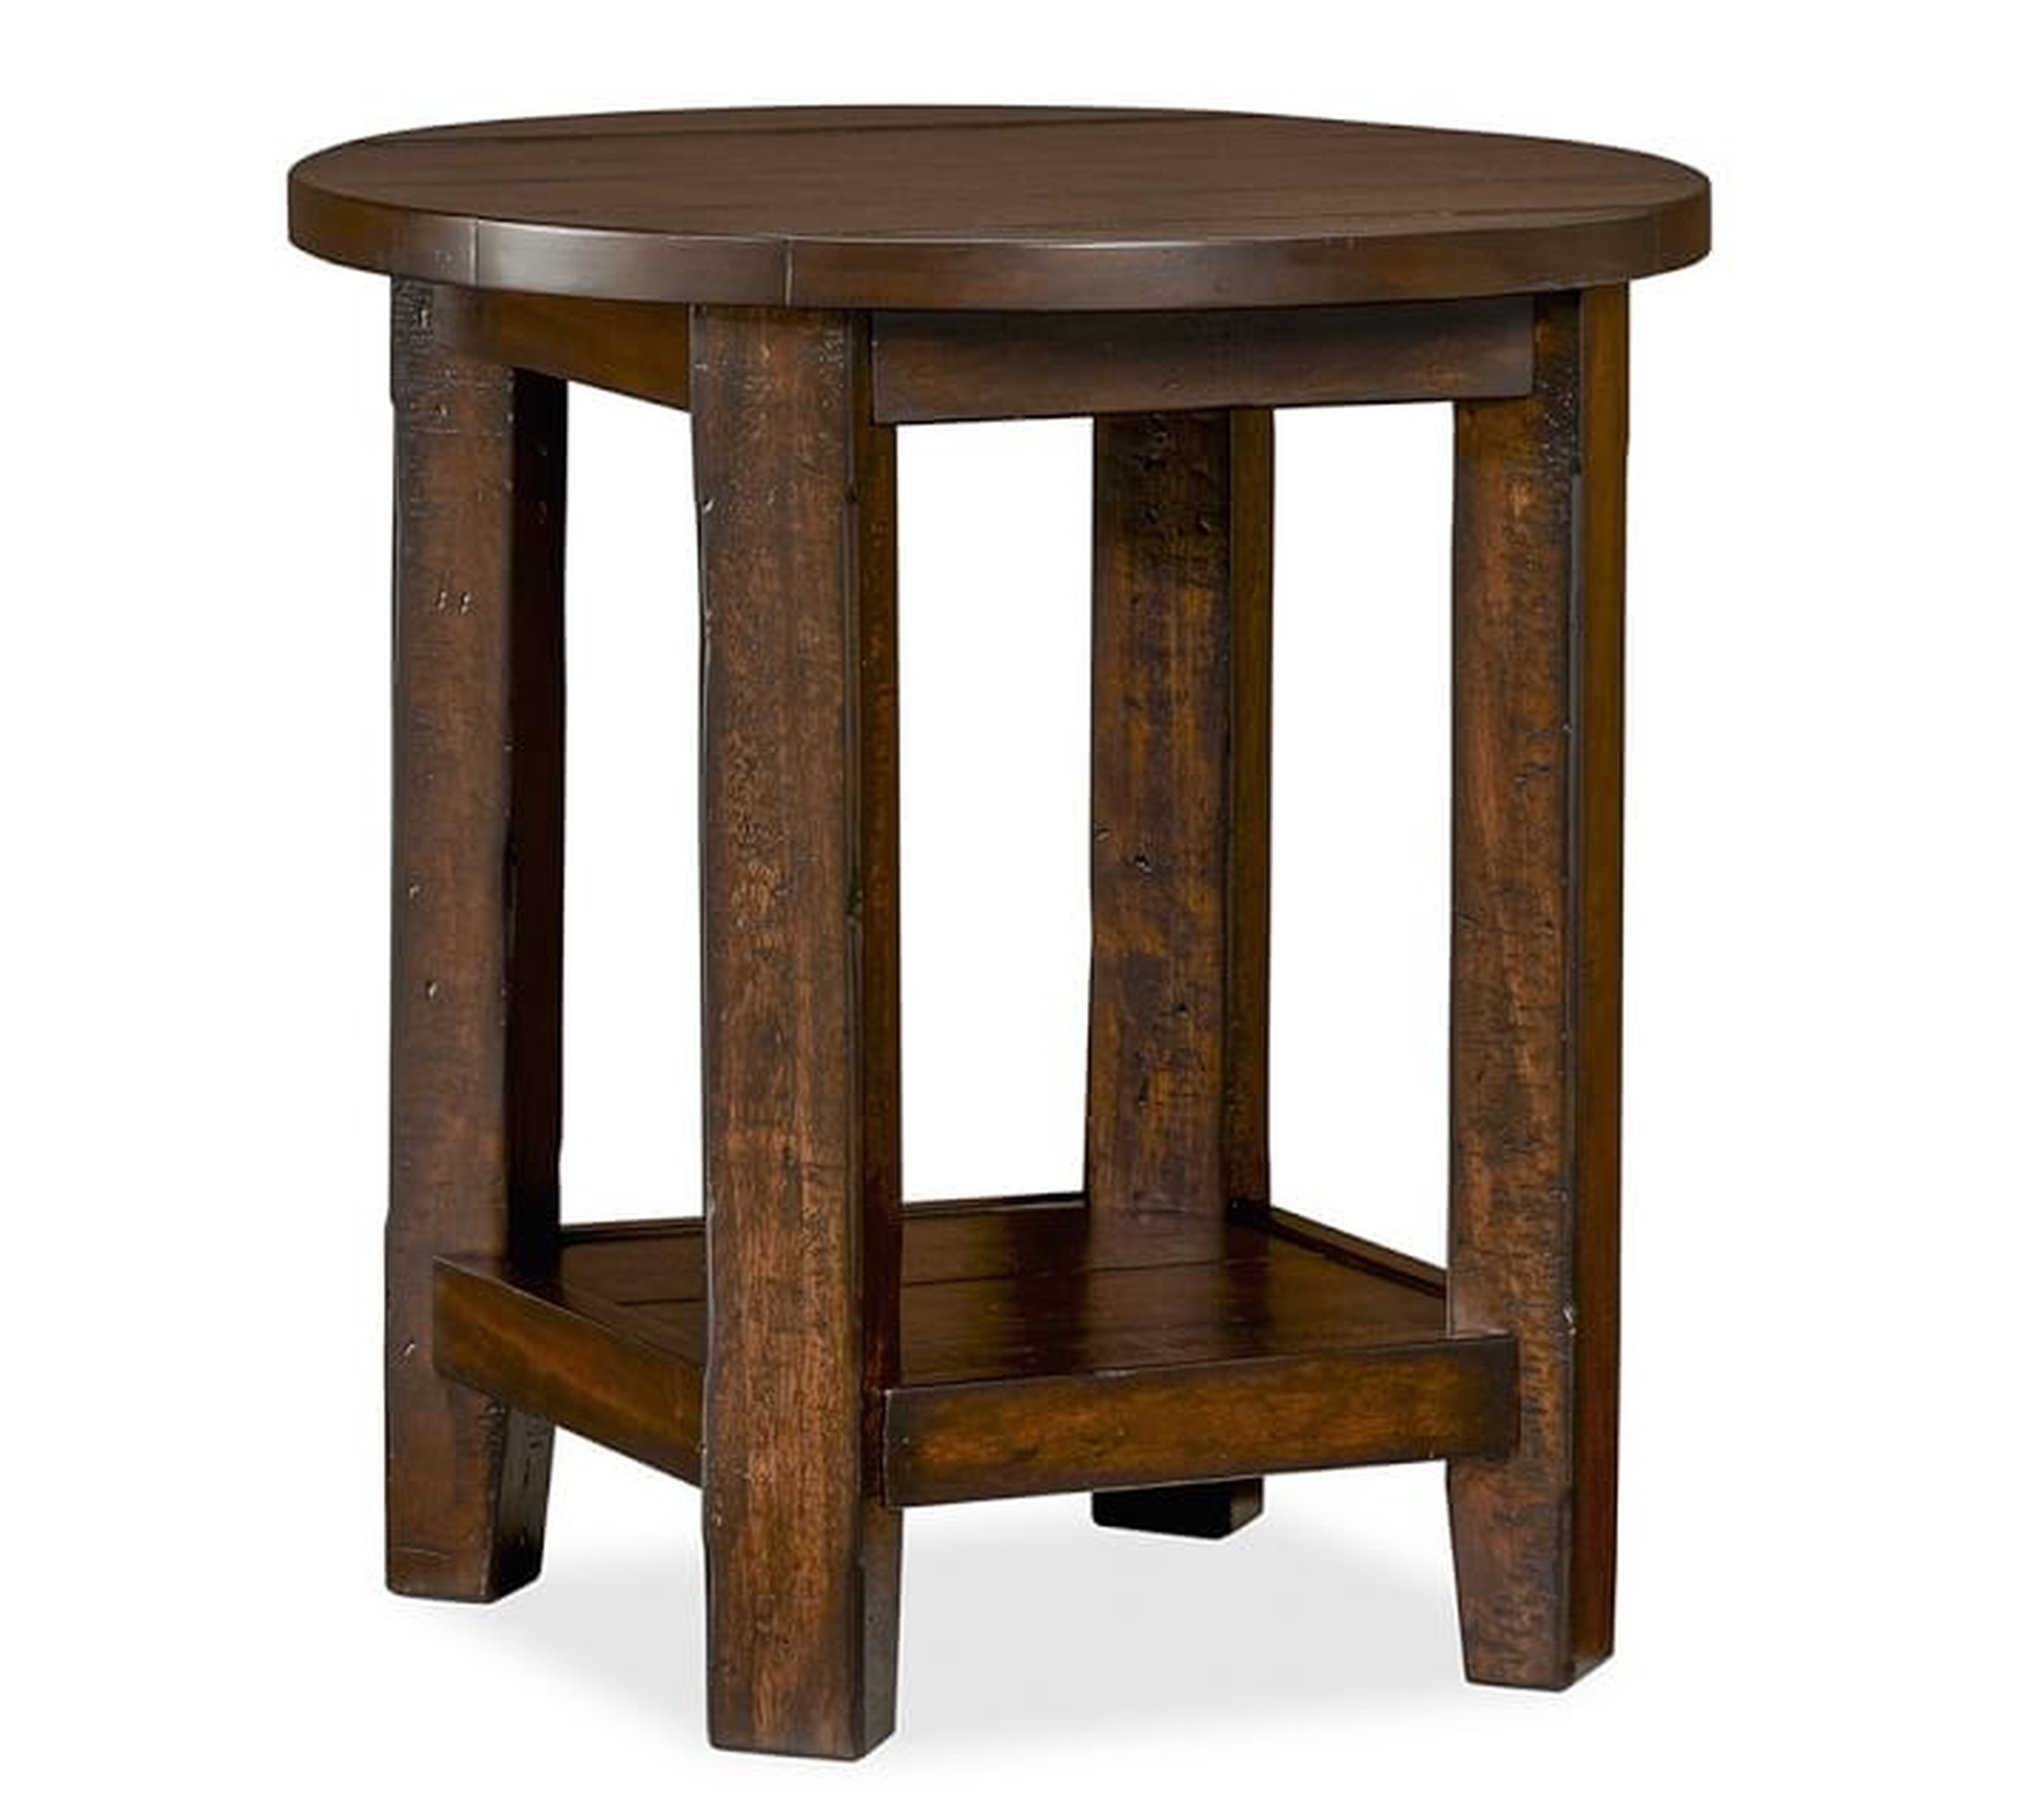 Benchwright 23" Round End Table, Rustic Mahogany - Pottery Barn